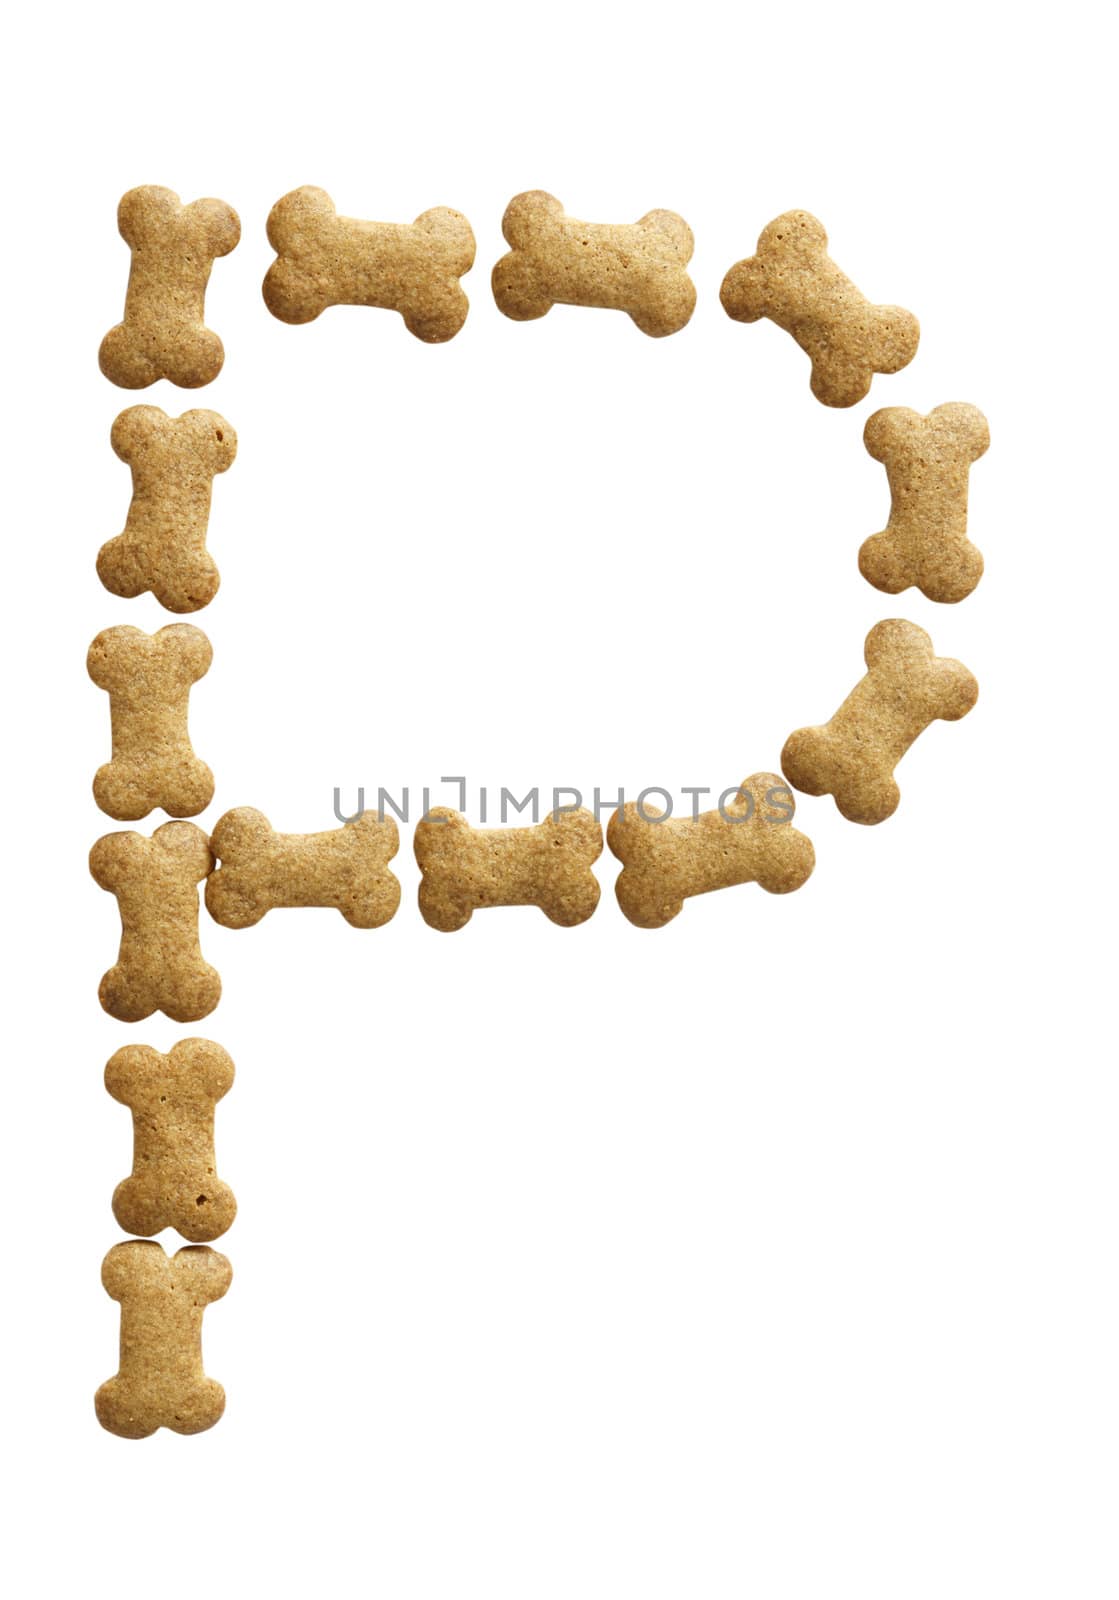 Letter P made of bone shape dog food on white background, shot directly from above